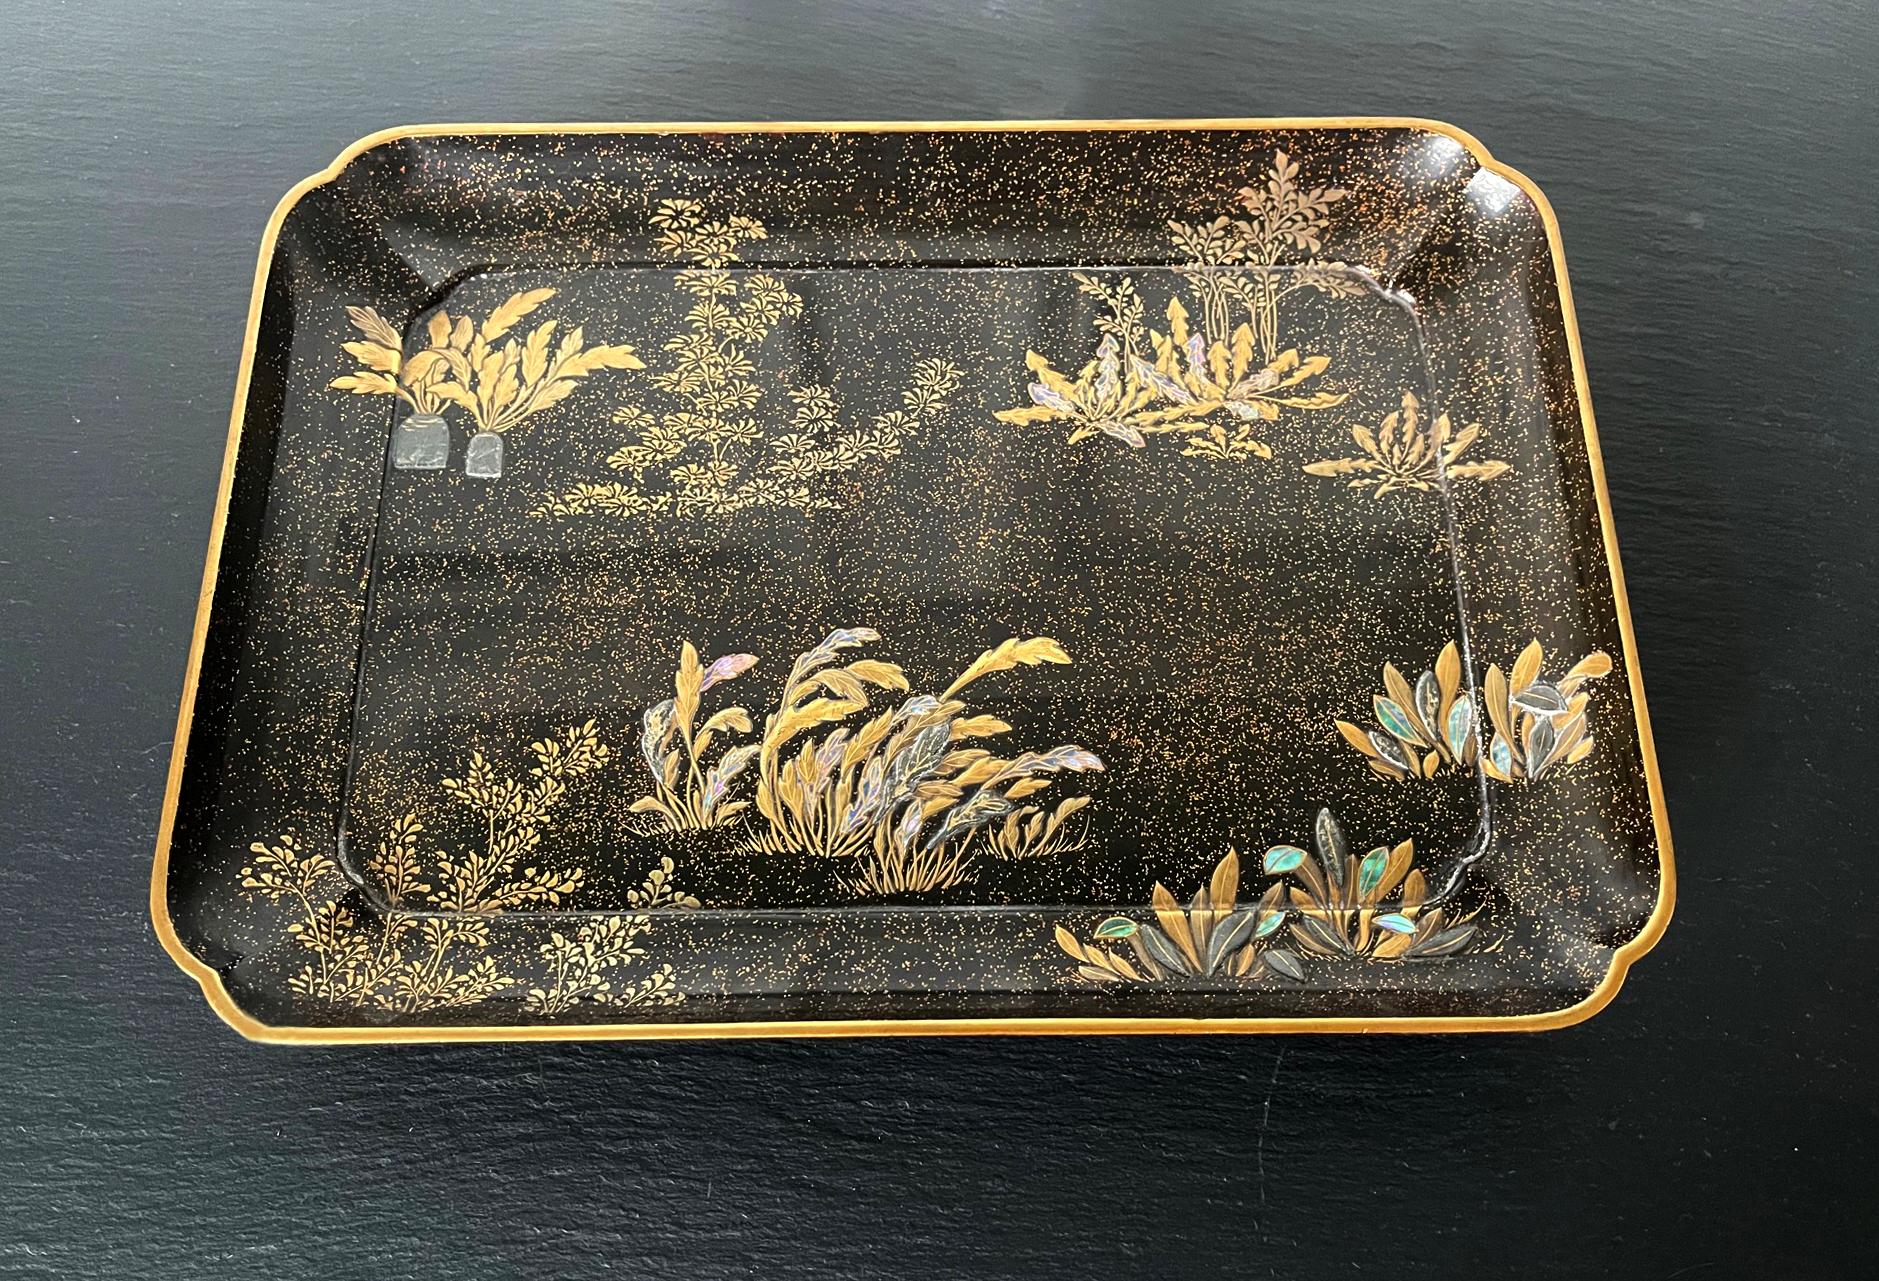 A lovely Japanese lacquer rectangular lacquer tray with a slightly scalloped corner and four L shape supporting feet by one of the most celebrated lacquer artist active in Edo period Hara Yoyusai (1772-1845). Yoyusai lived in Edo (Tokyo) and worked